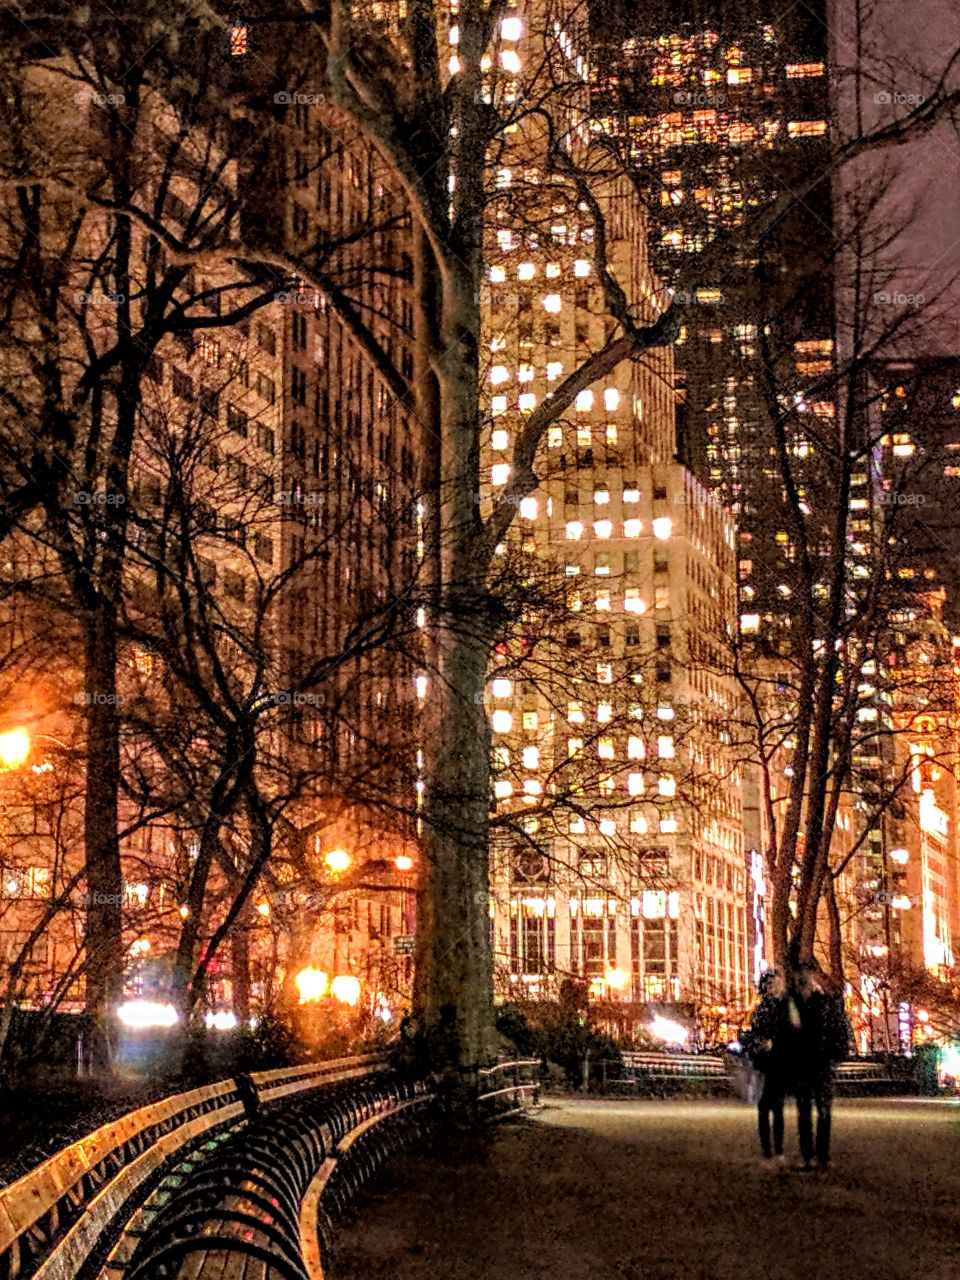 people strolling in Central Park at night